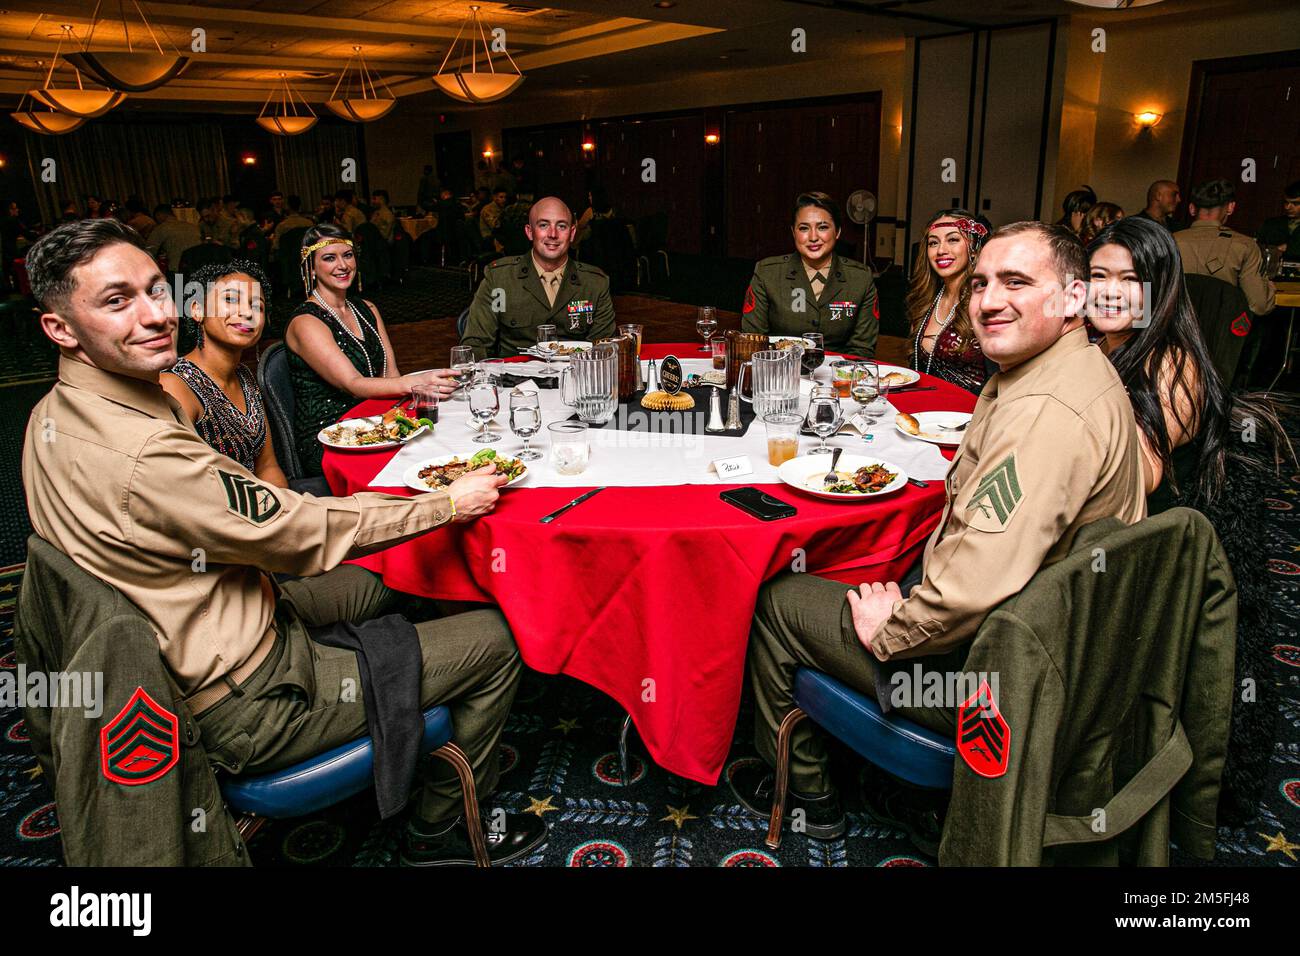 Andrews Air Force Base  – U.S. Marines with Chemical Biological Radiological Nuclear (CBRN) Alpha platoon had a formal dinner with family members aboard Andrews AFB, Md. CBRN Marines spent the night sustaining and reinforcing relationships with platoon and family members. (Official U.S. Marine Corps photo by Pfc. Angel Ponce/Released) Stock Photo